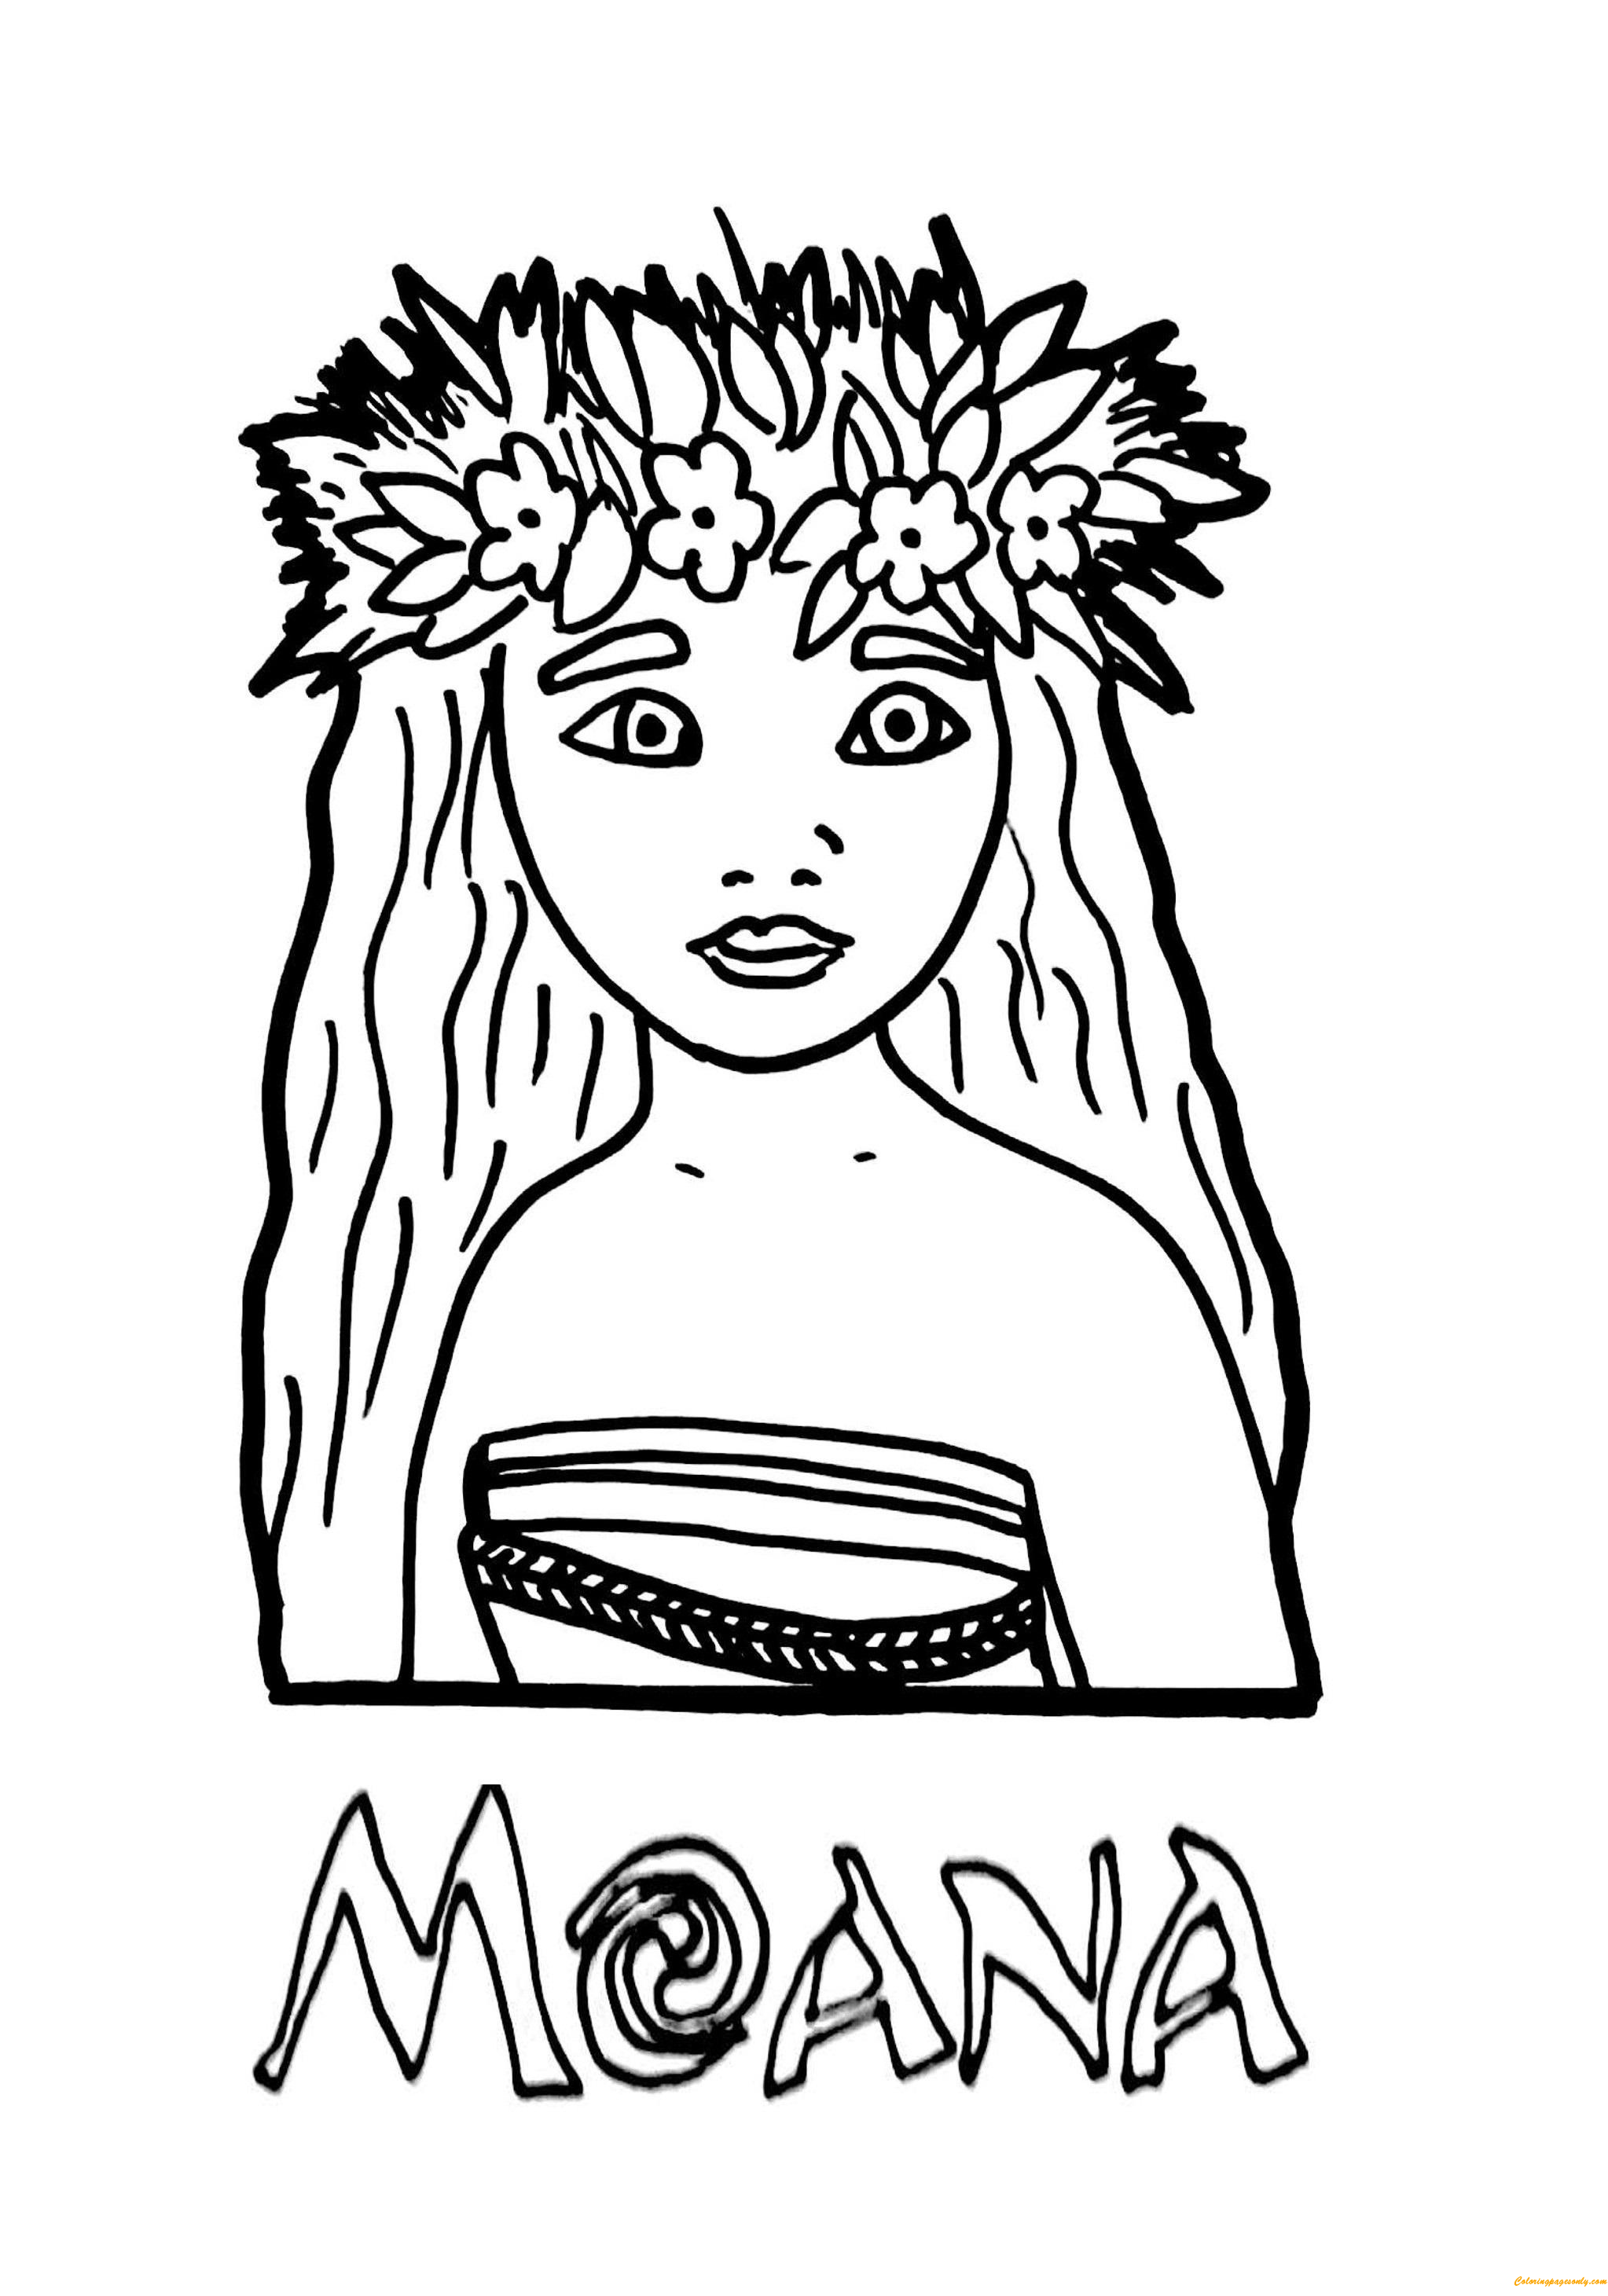 princess-moana-coloring-page-free-coloring-pages-online